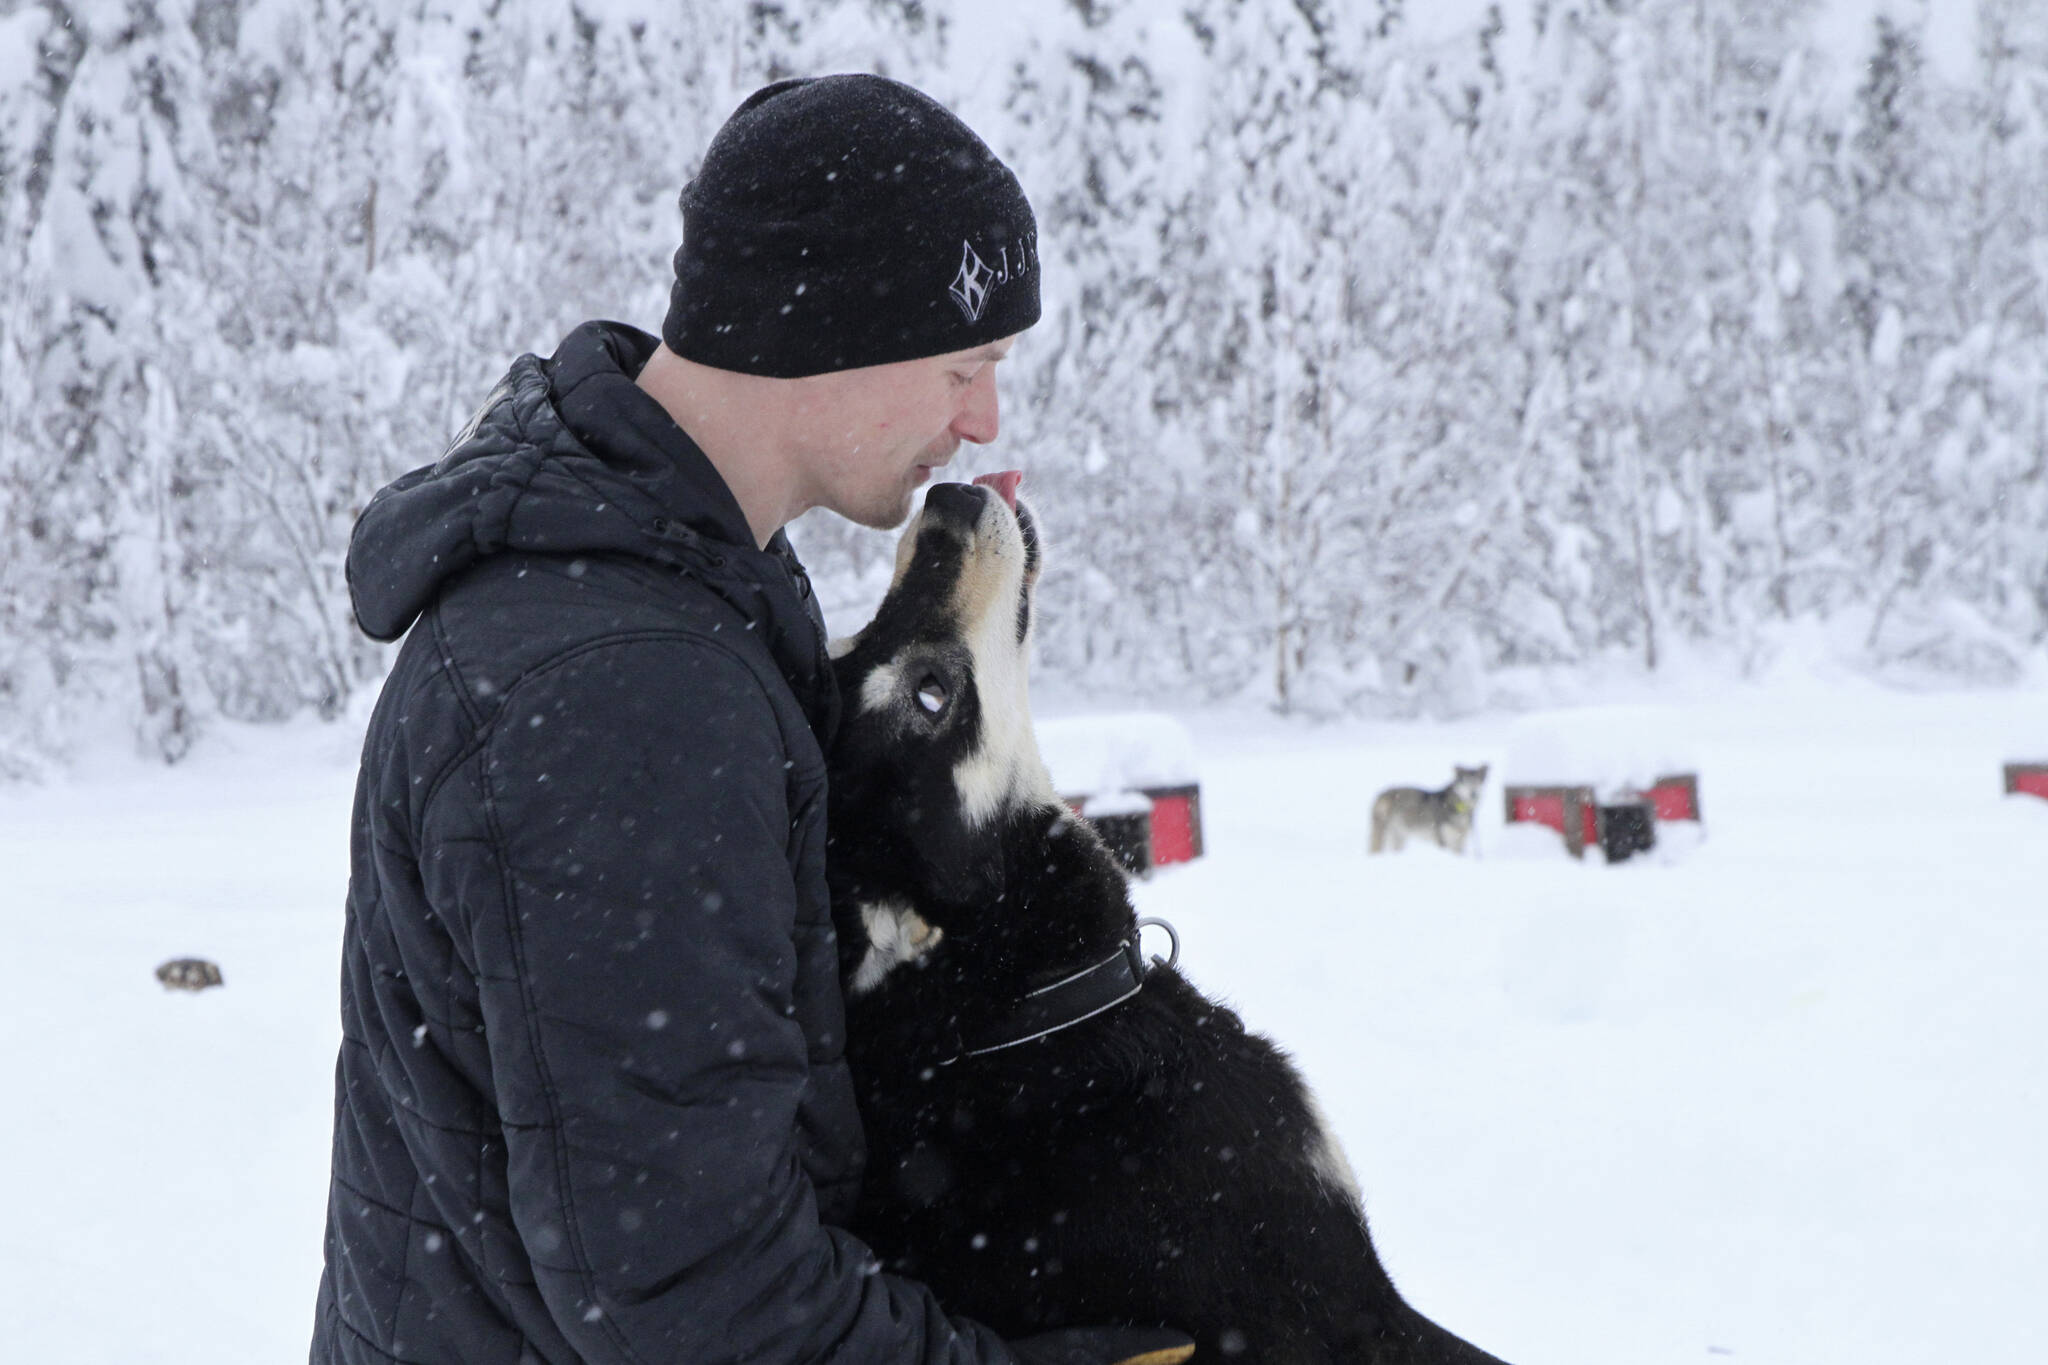 Five-time Iditarod champion Dallas Seavey is shown Feb. 22, 2022, playing with Ace, one of his dogs at his kennel in Talkeetna, Alaska. Seavey is tied with musher Rick Swenson for the most Iditarod victories ever, and Seavey is looking for his sixth title when the Iditarod Trail Sled Dog Race starts Saturday, March 5, in Alaska. (AP Photo / Mark Thiessen)